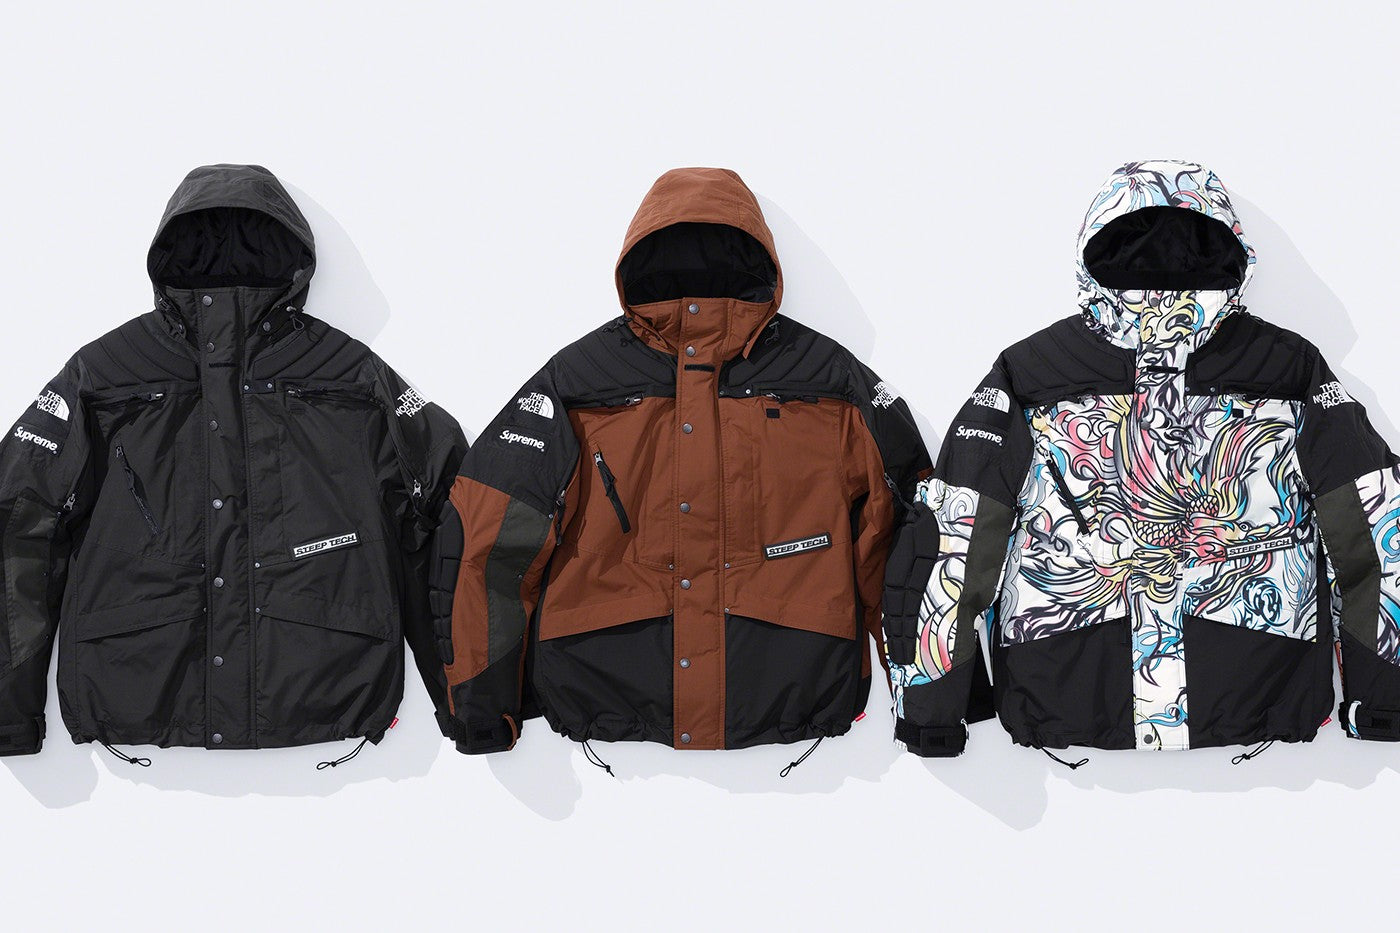 The Best Supreme x The North Face Jacket Collabs